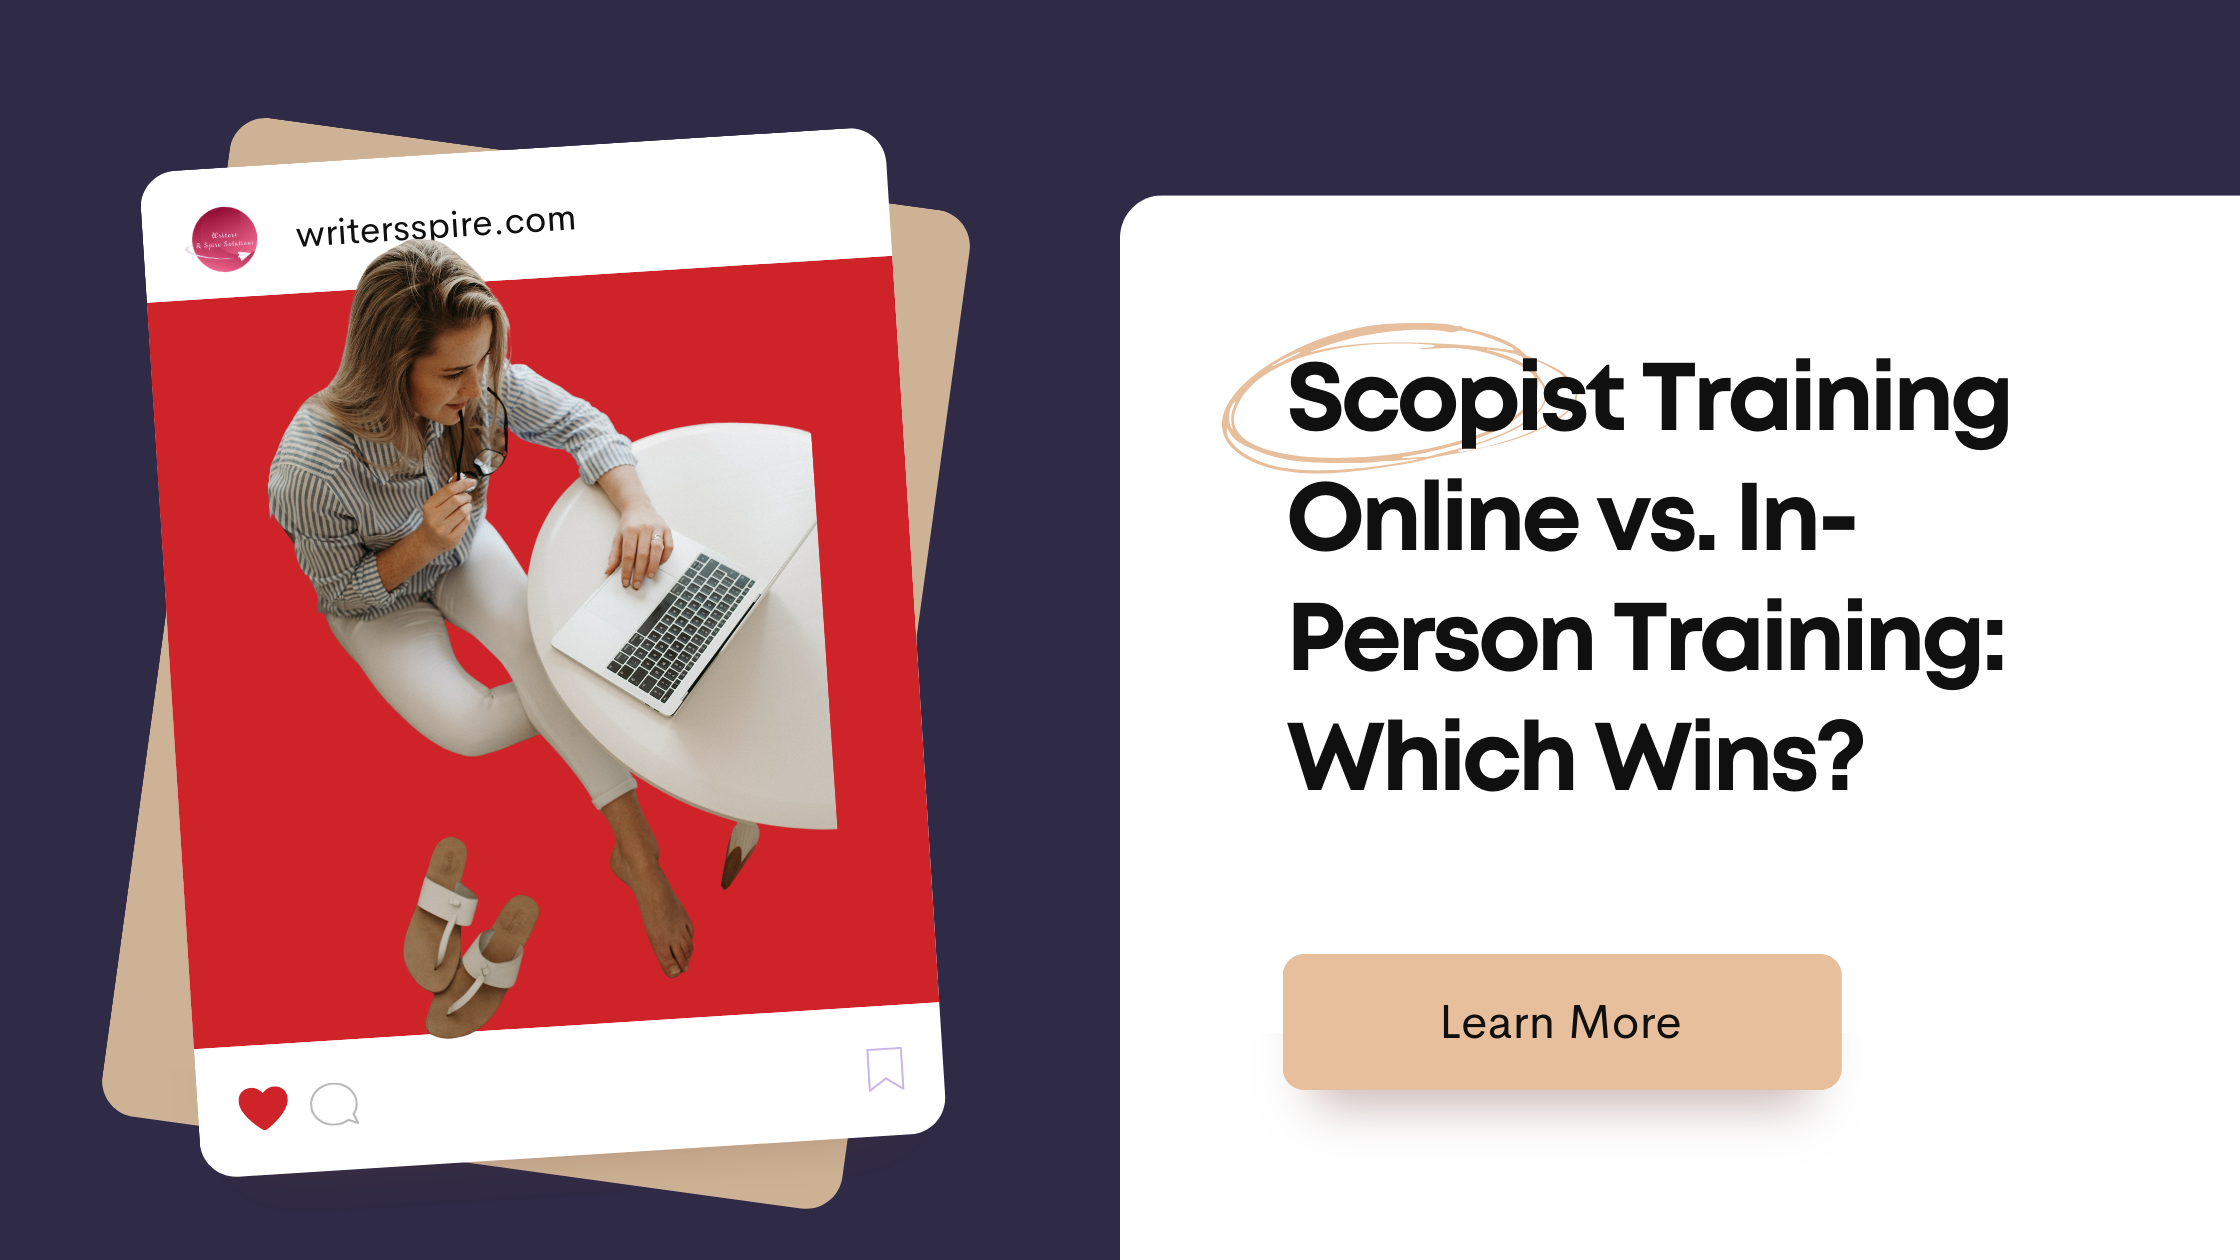 Scopist Training Online vs. In-Person Training: Which Wins?